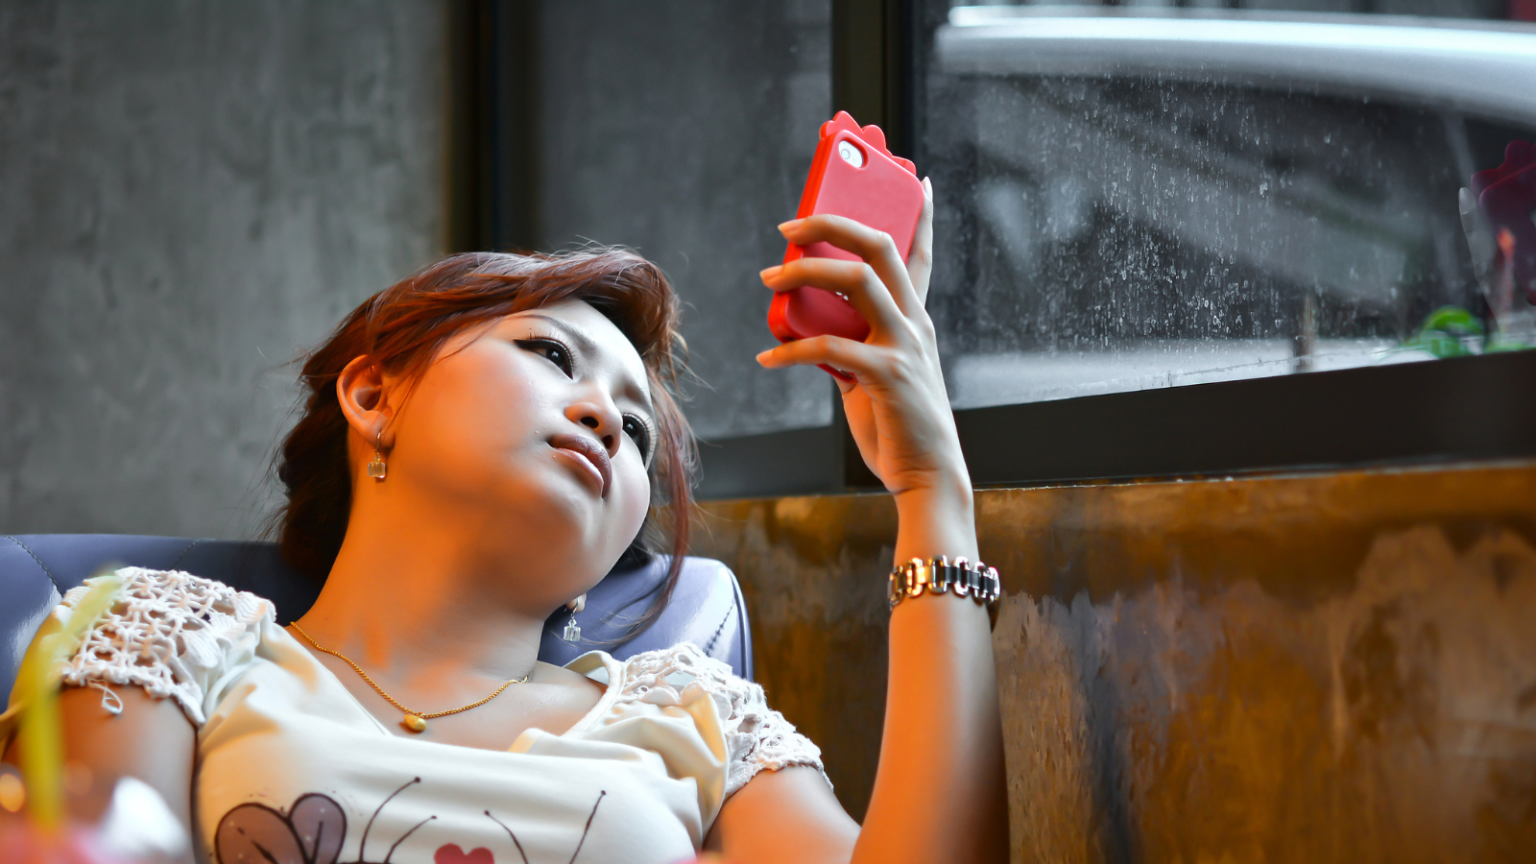 Photo of a feminine Asian person with short hair looking at phone with a mildly sad expression